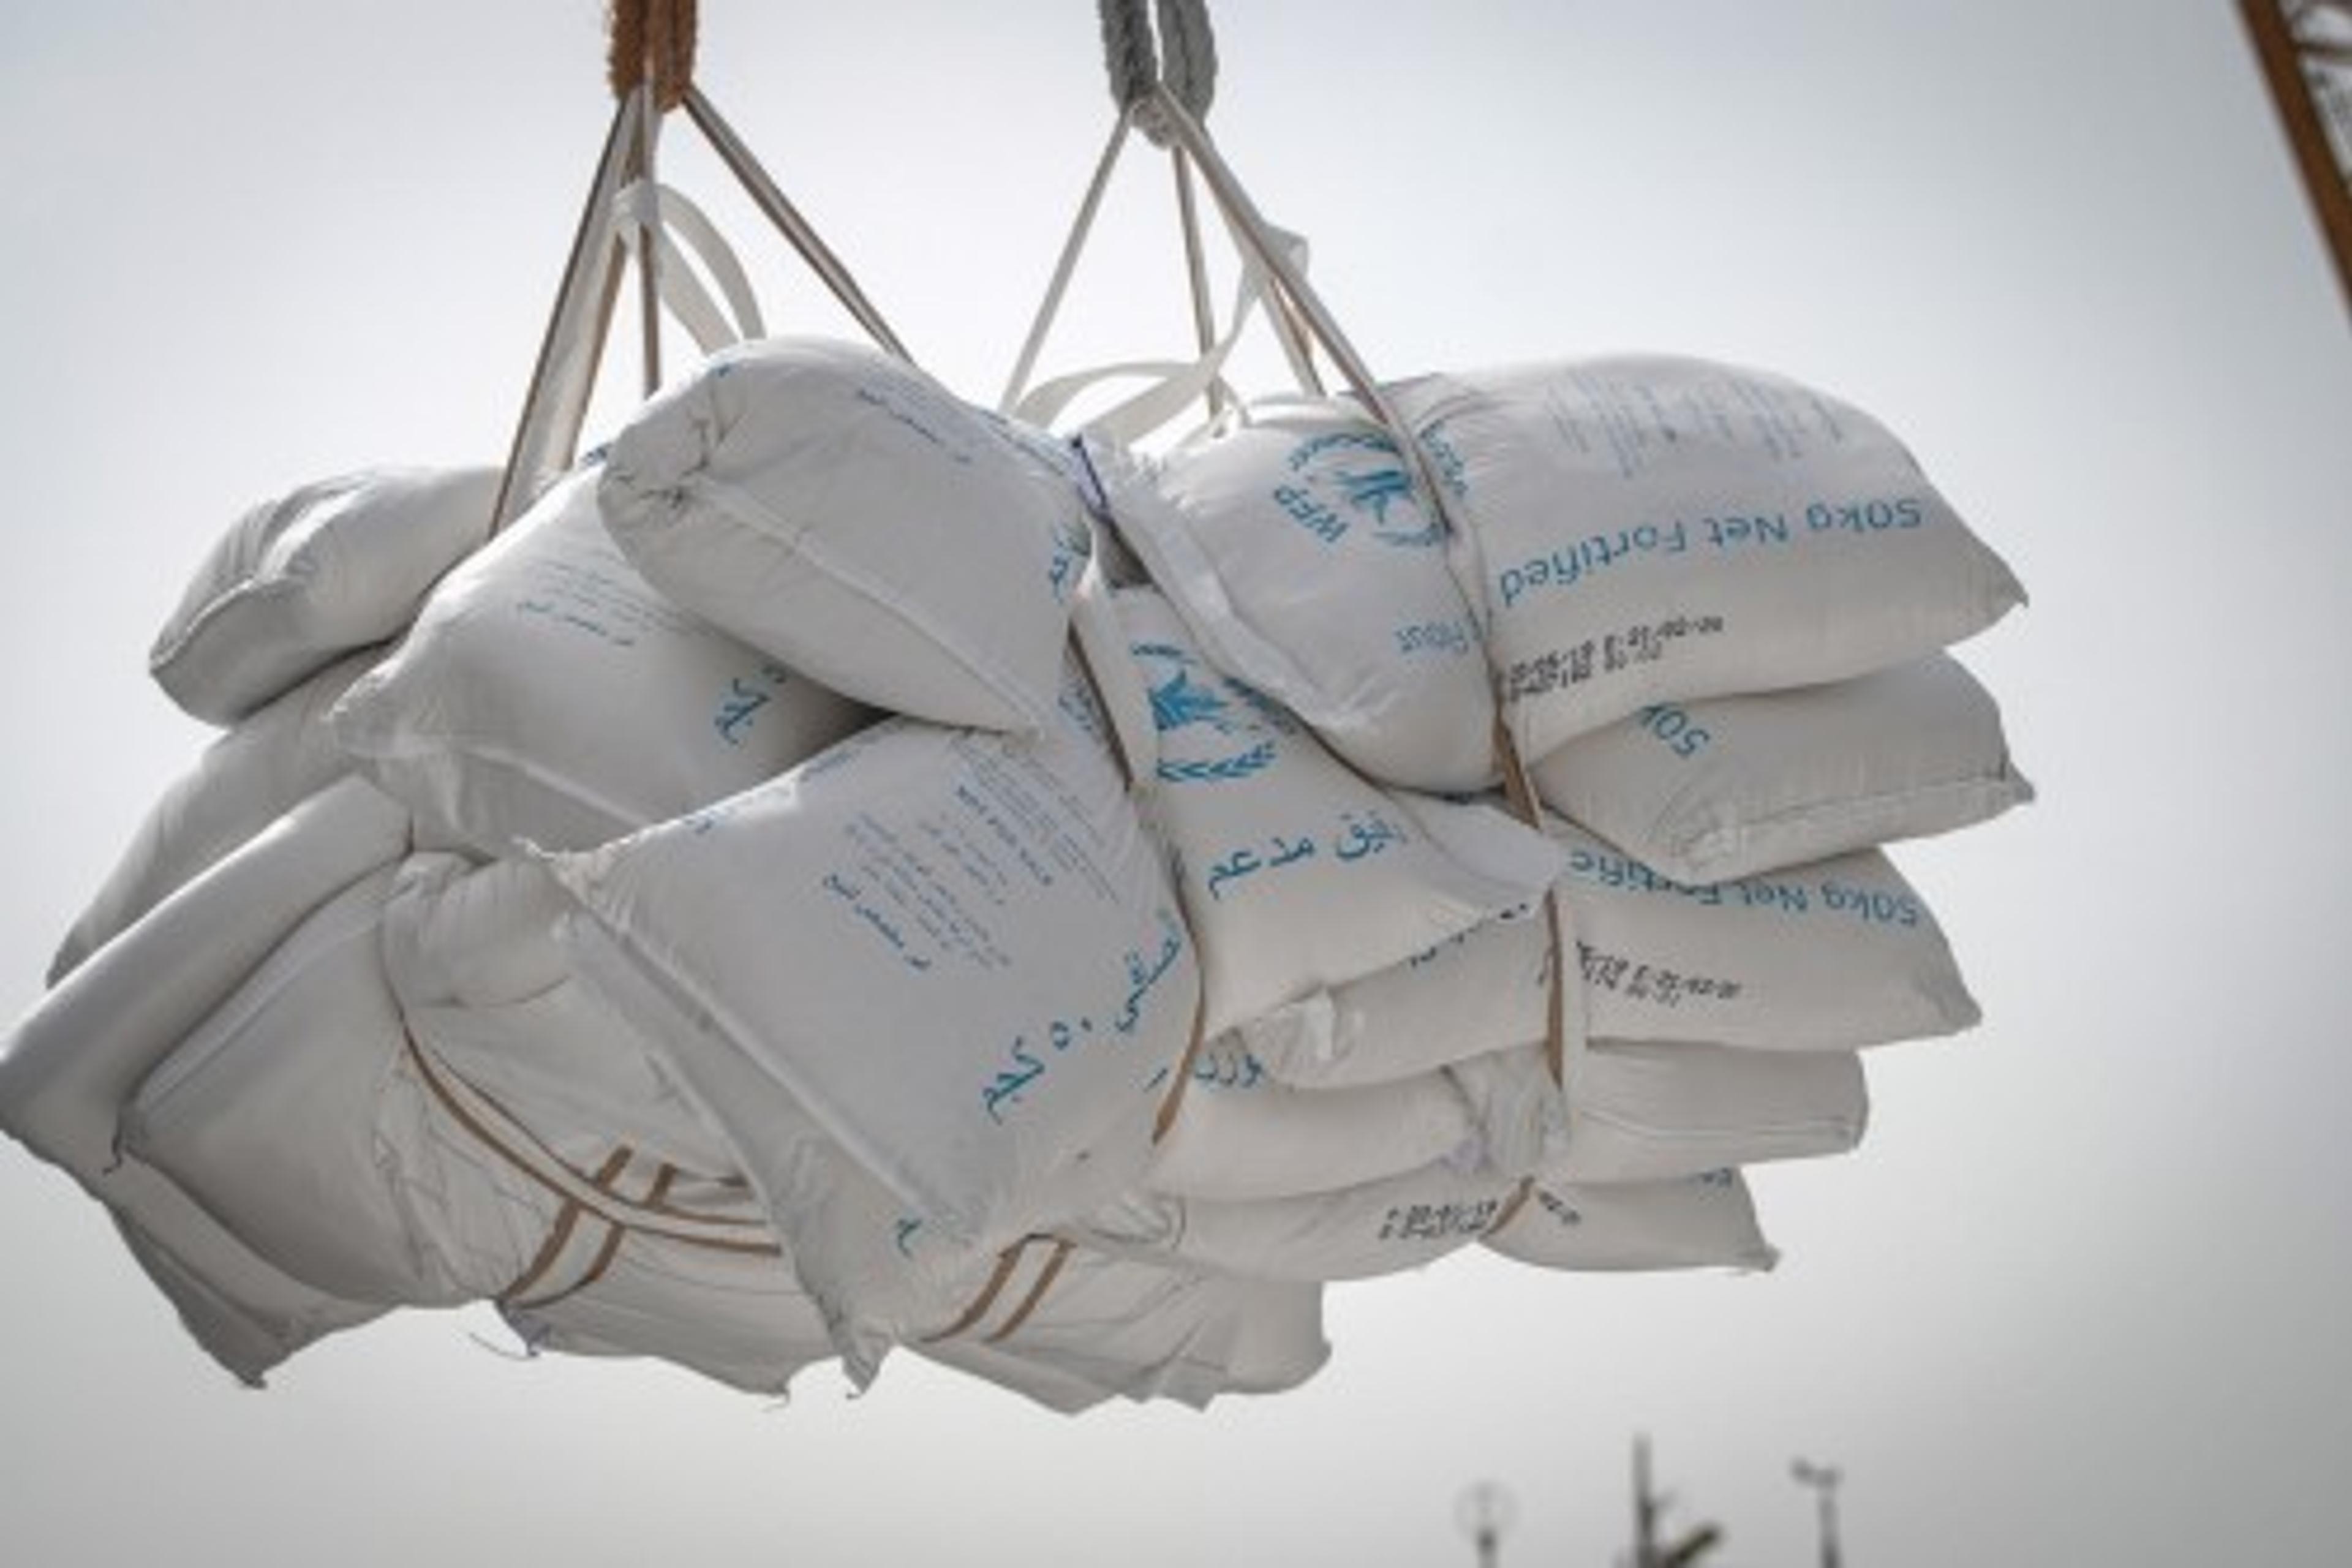 A bunch of big plastic bags with rice being transported